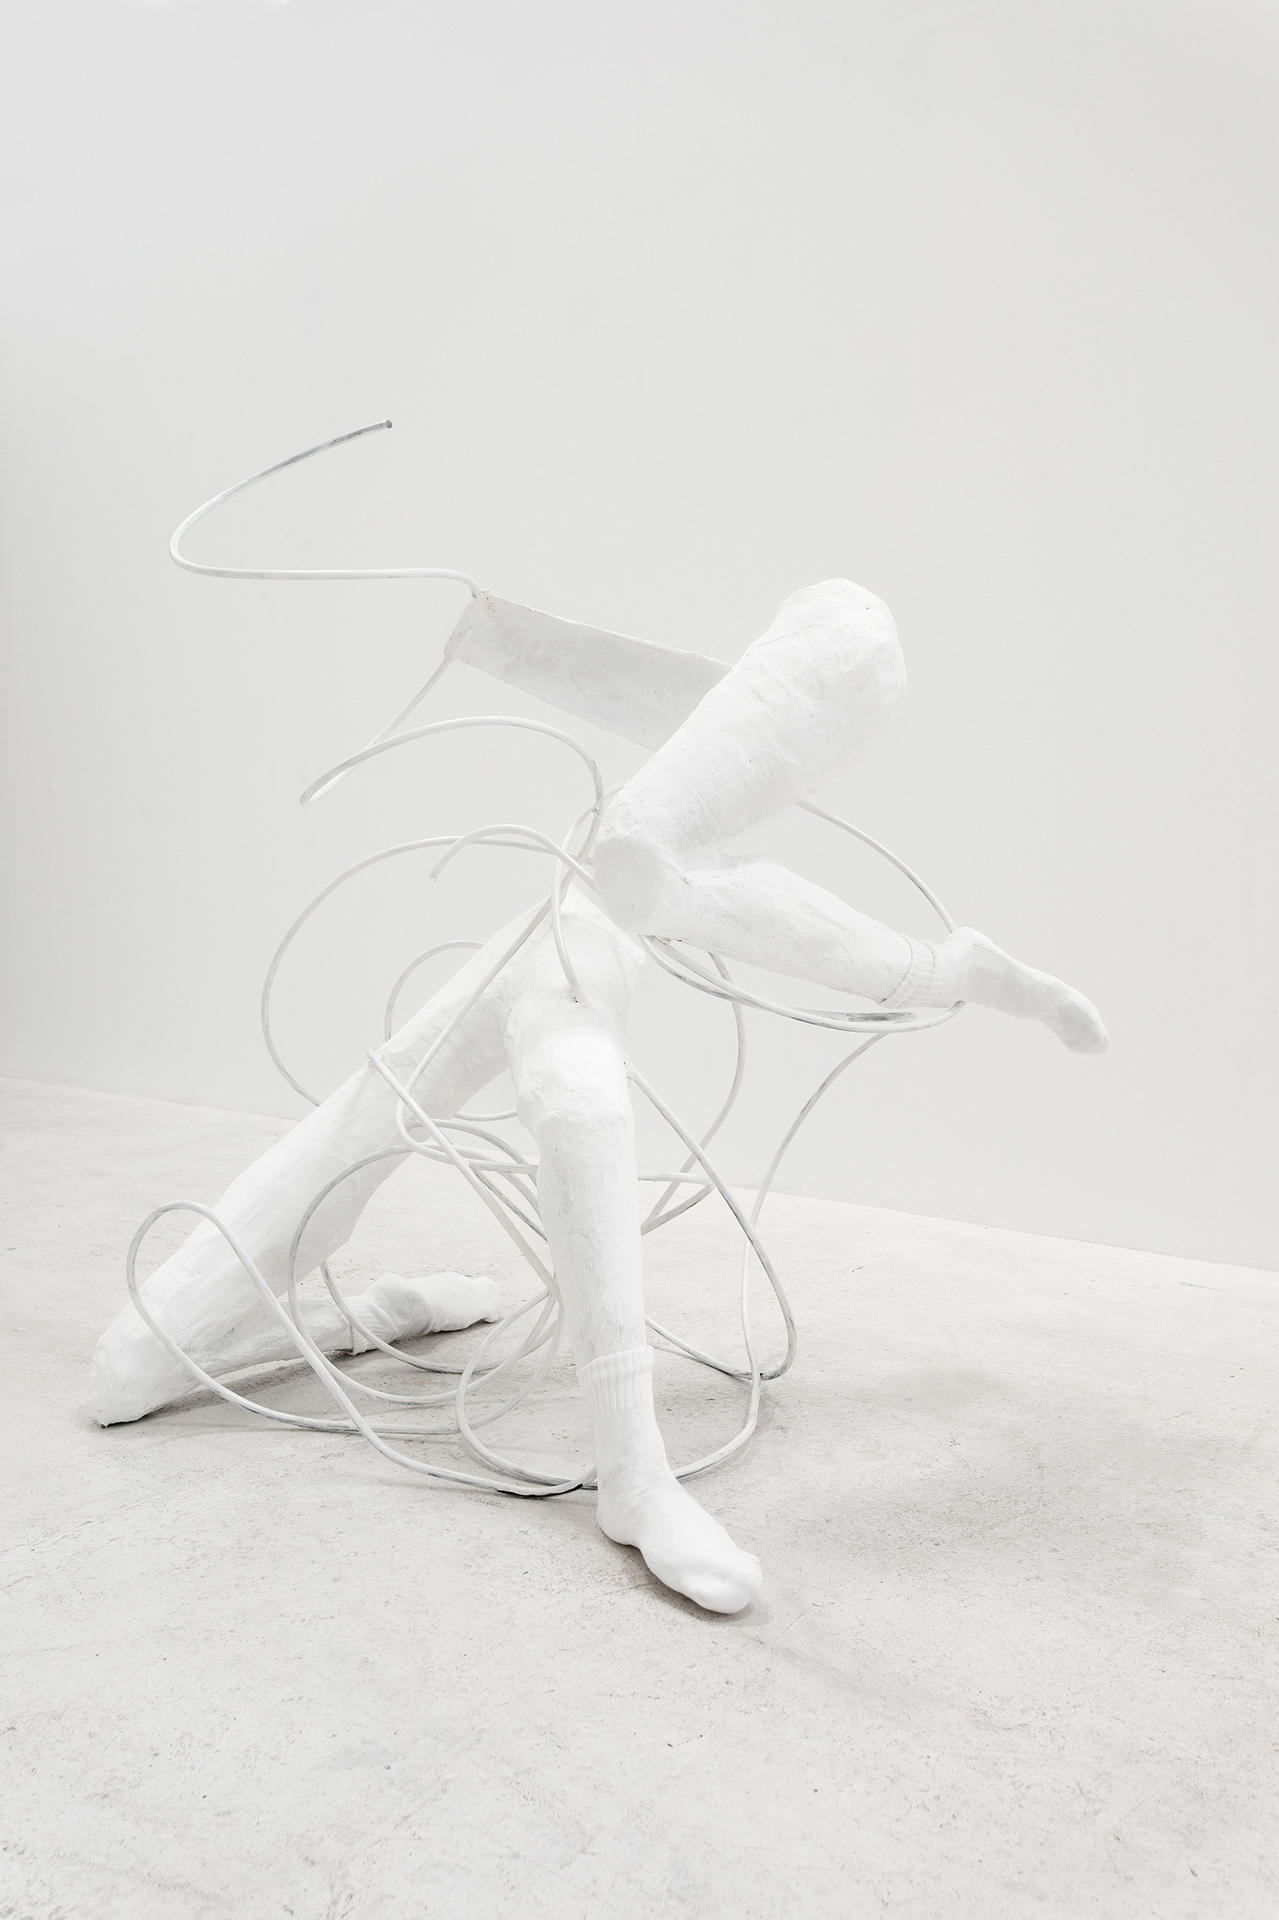 Hannah Fitz. And laughed aloud from the pure joy of being alive, 2020. Steel, Card, Wire, Plaster Bandage, Plaster Filler, Resin, Clothing. 120 x 100 x 90 cm